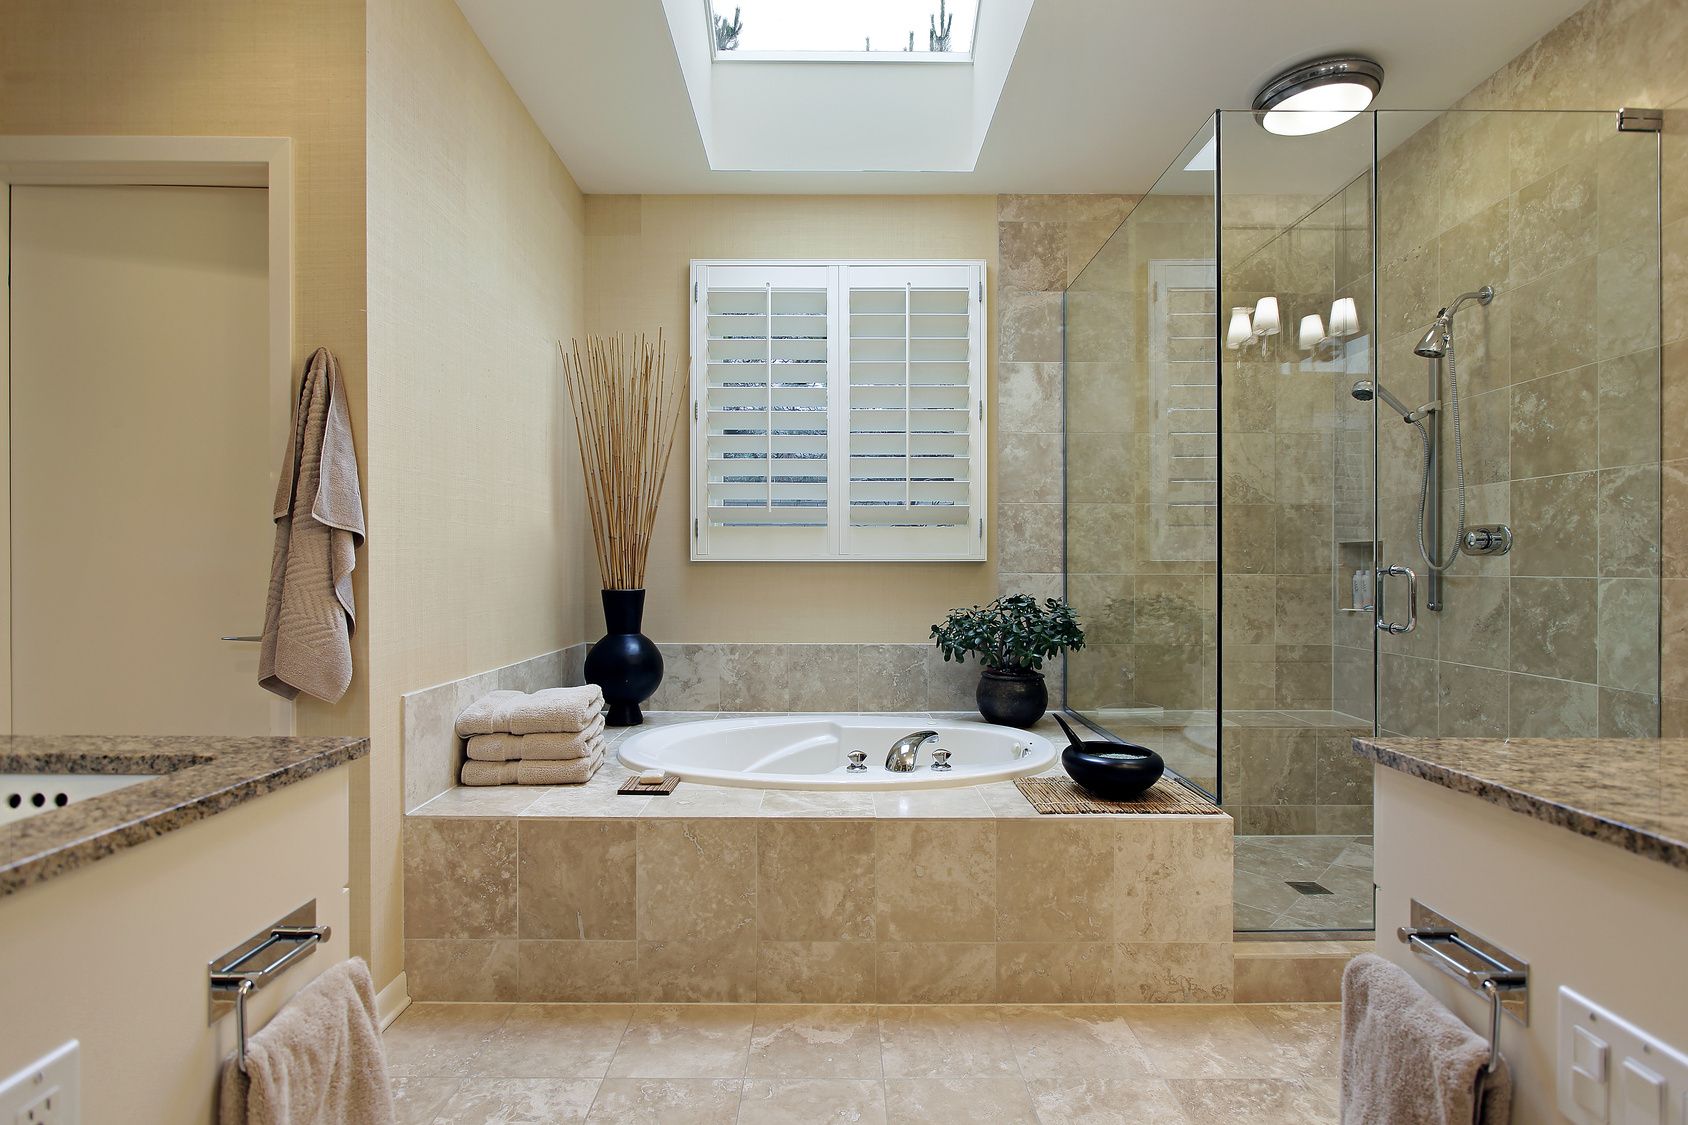 Narrow White Window Blinds Near Round Sunken Tub Paired With Brown Bathroom Tile Remodel Also Corner Glass Shower Room Design (Photo 2396 of 7825)